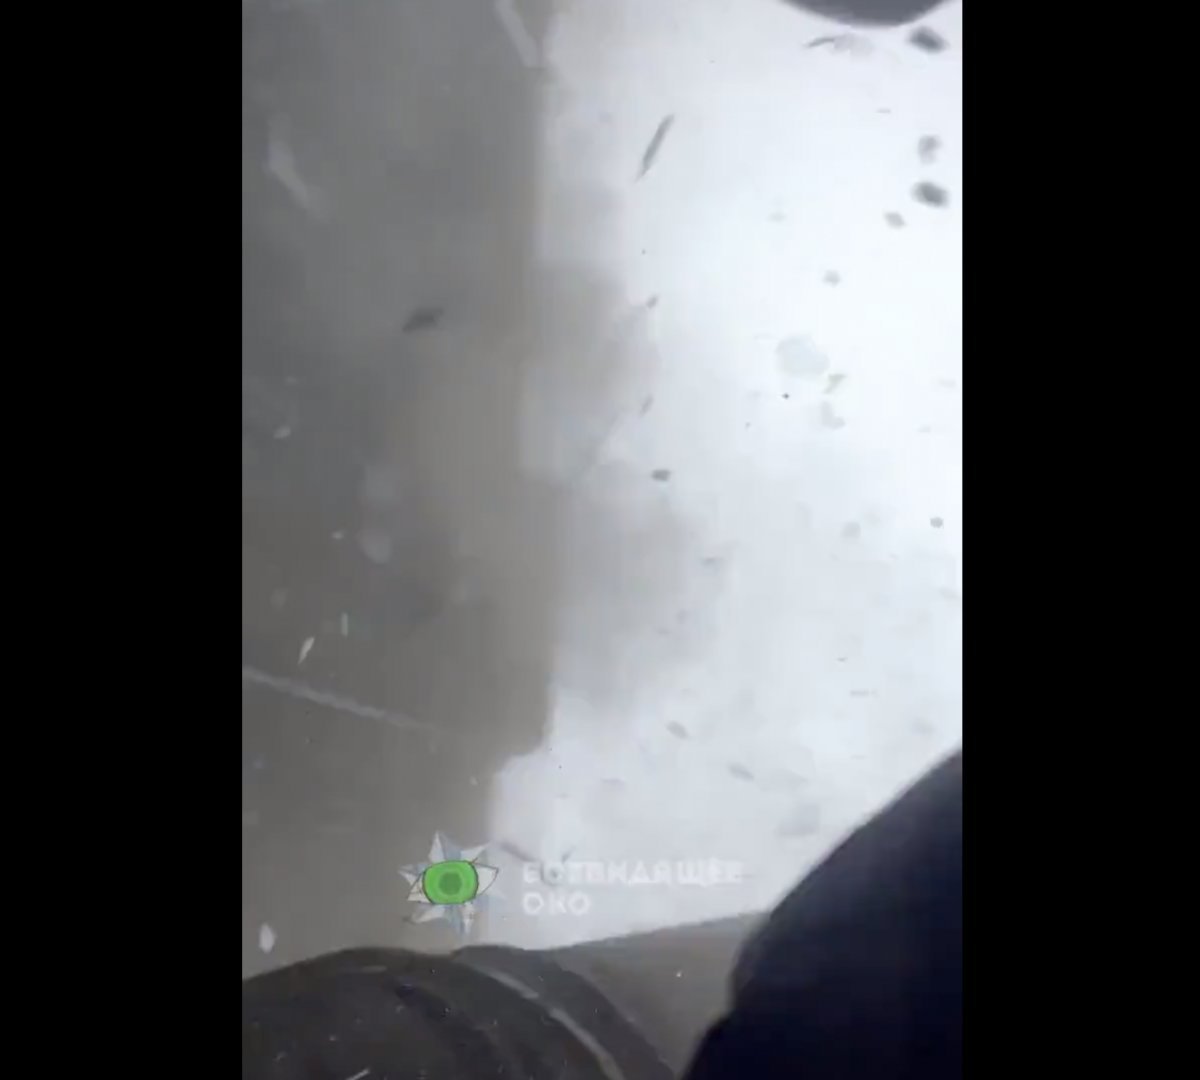 Moments when the missile hit the building in Ukraine #4